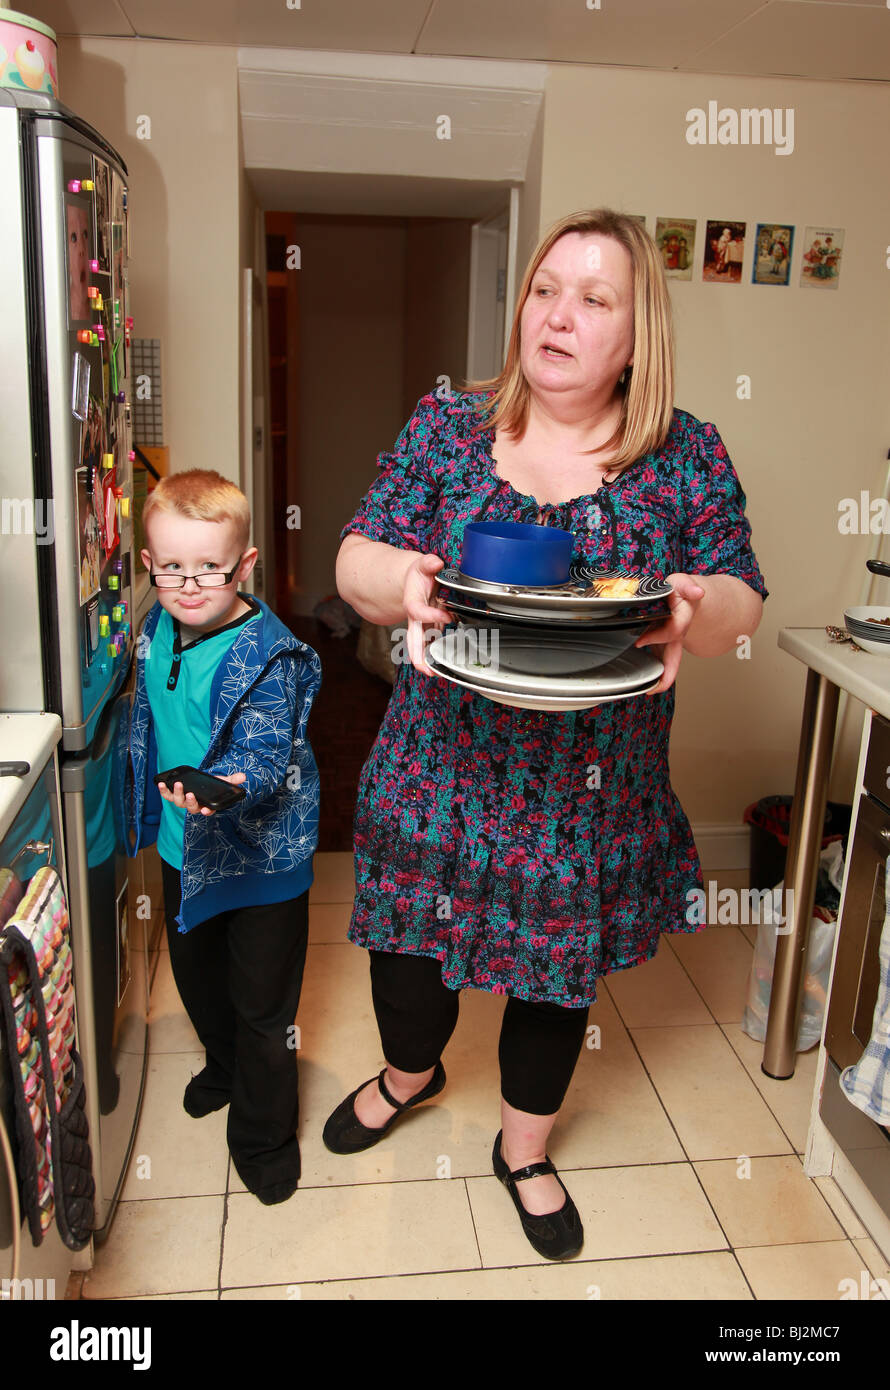 Woman carrying dirty plates in the kitchen with a child. Stock Photo